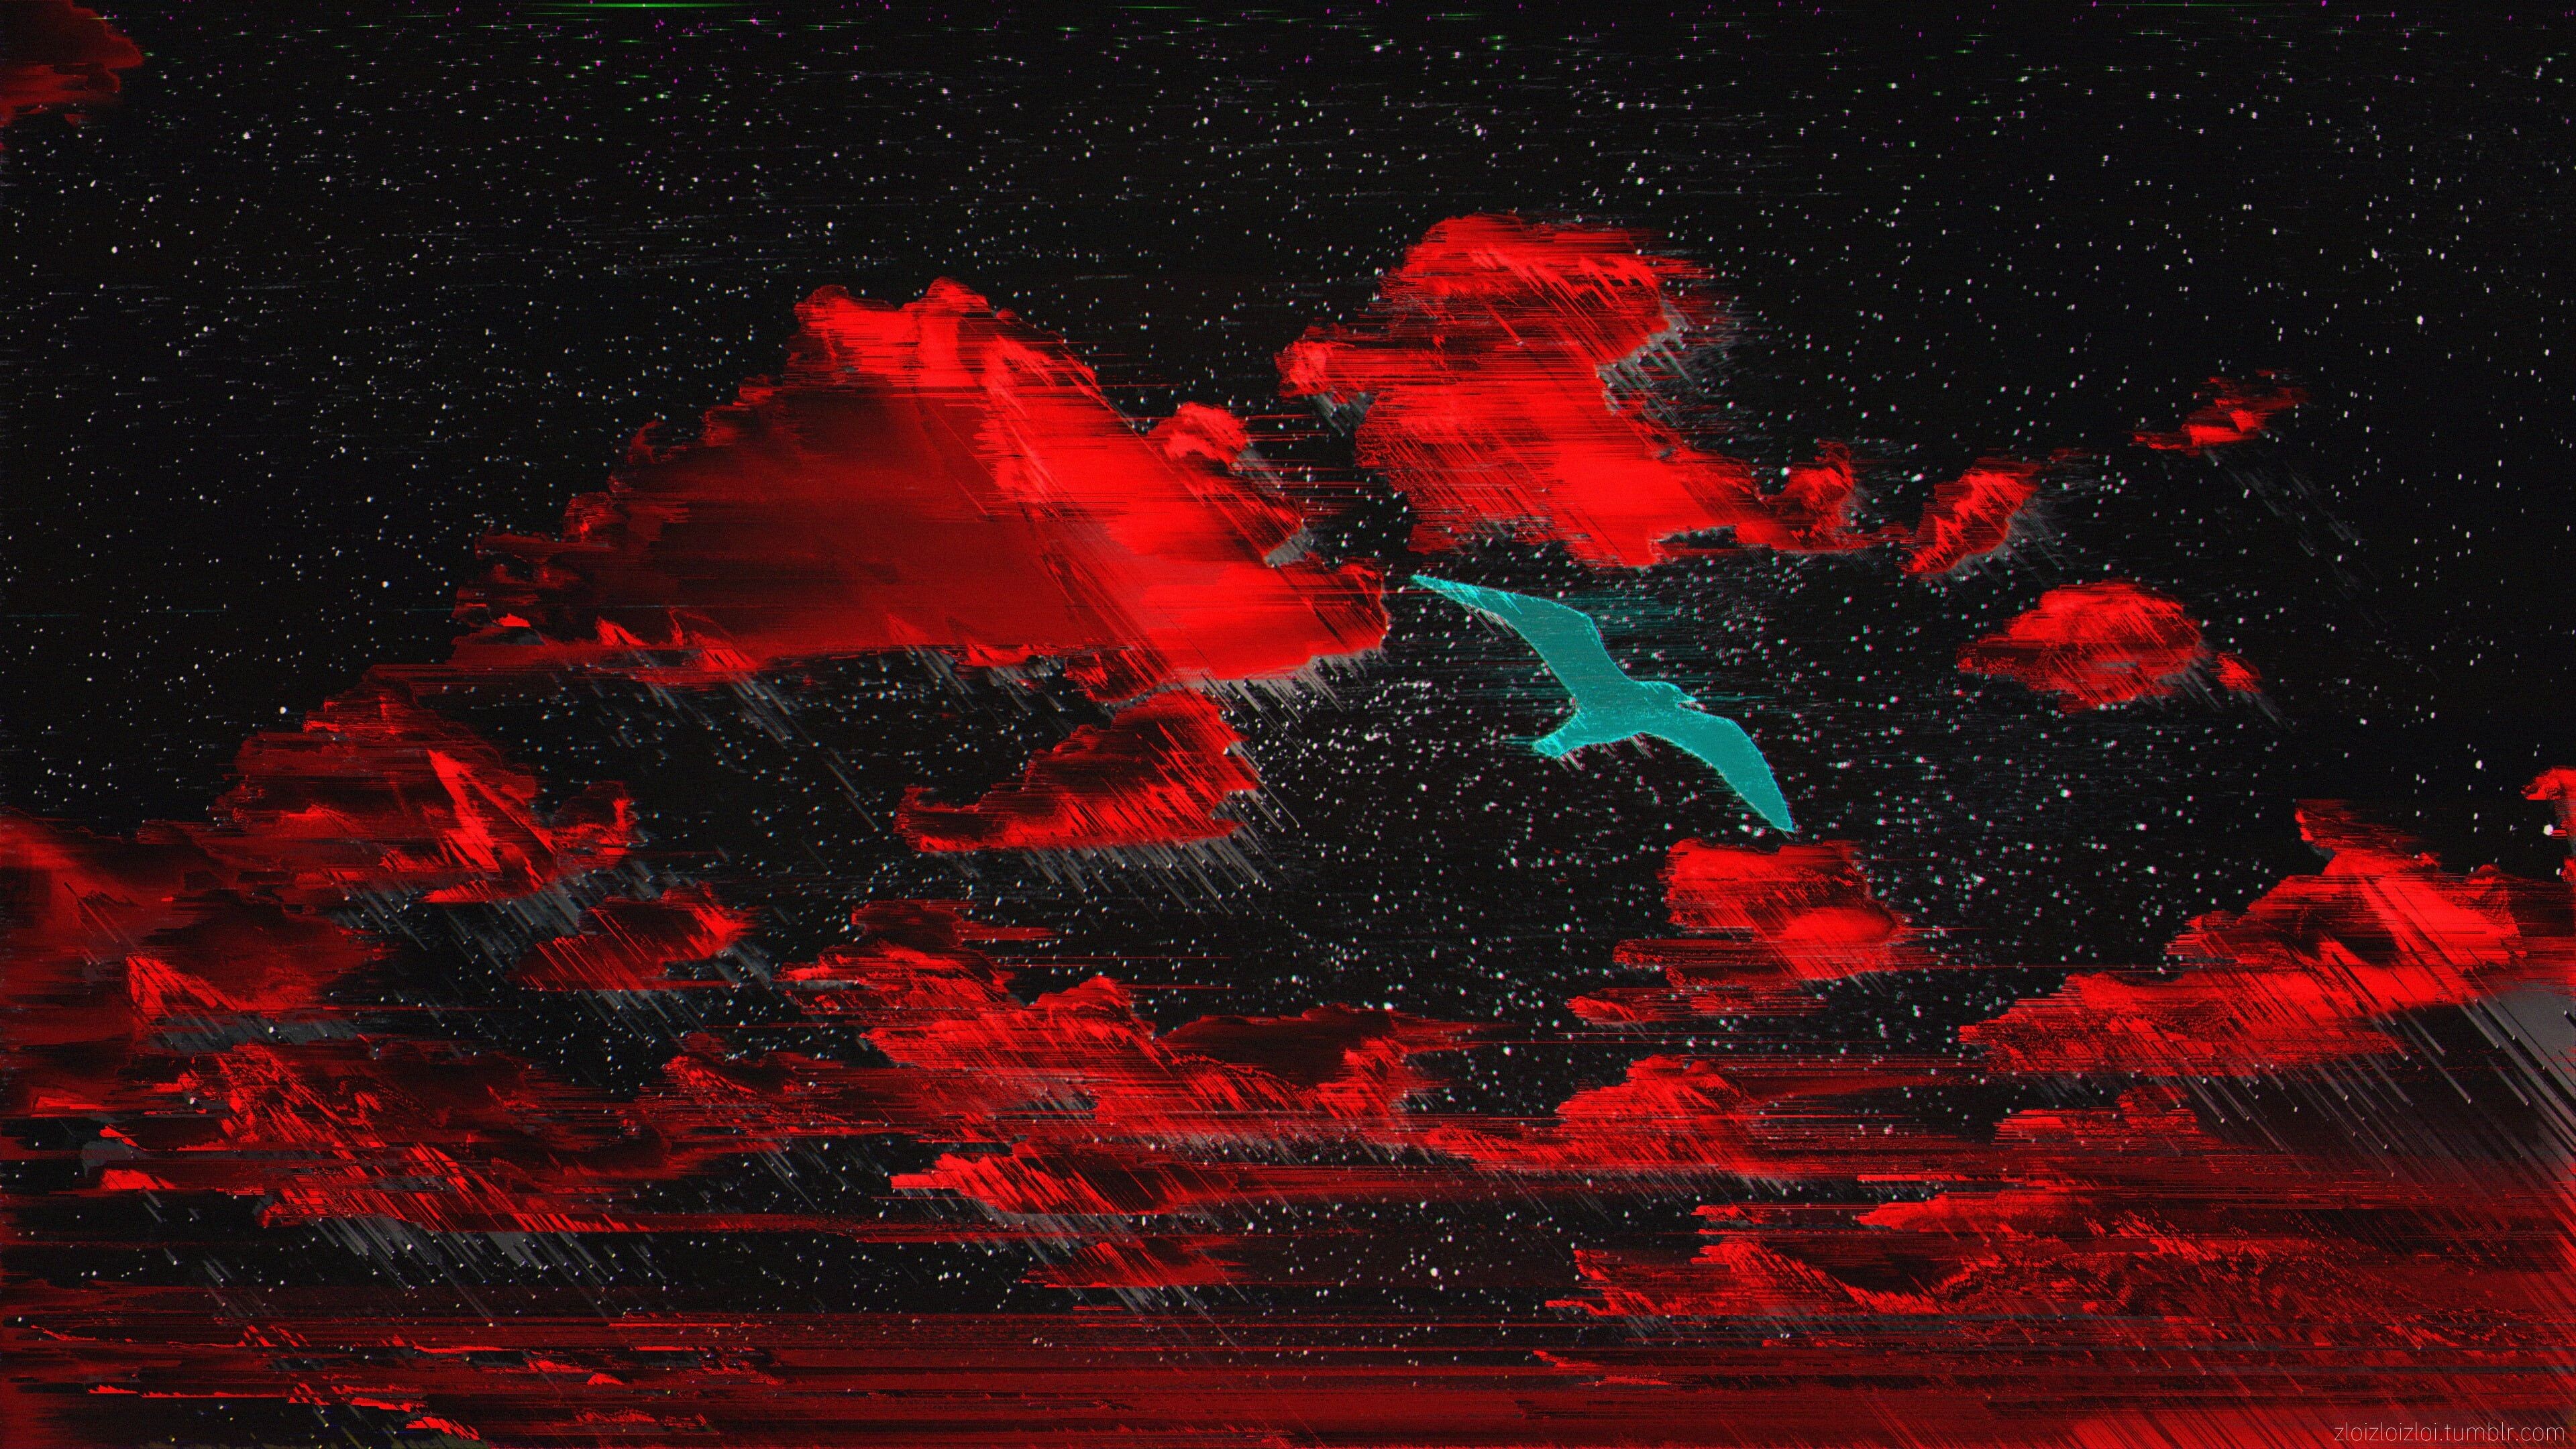 Glitch: Red abstract digital art, Blue bird, Red clouds, Two-dimensional space. 3840x2160 4K Wallpaper.